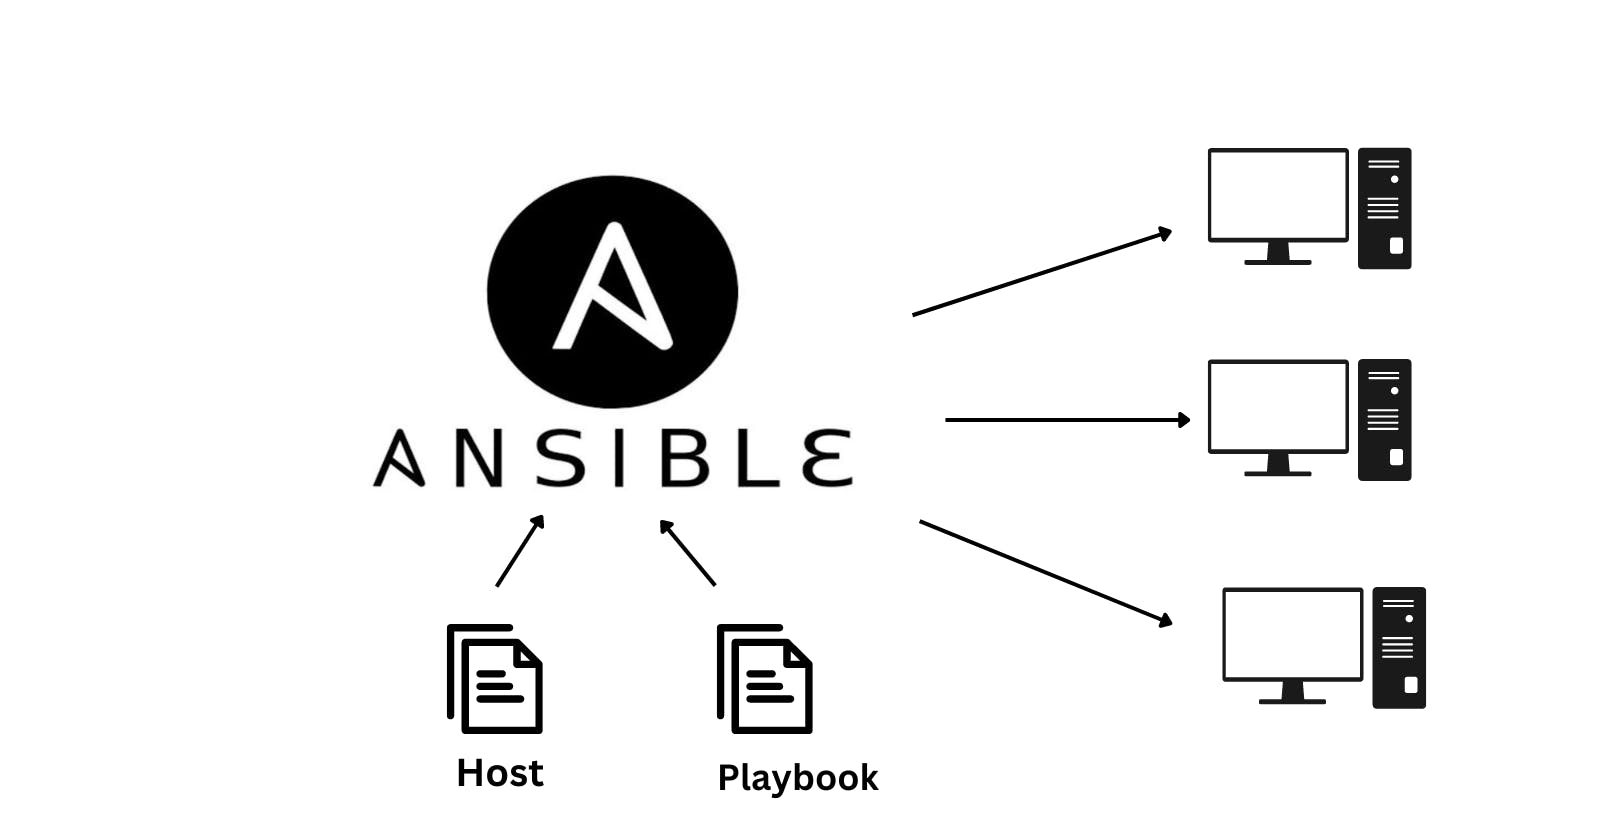 Ansible configuration and installation of packages